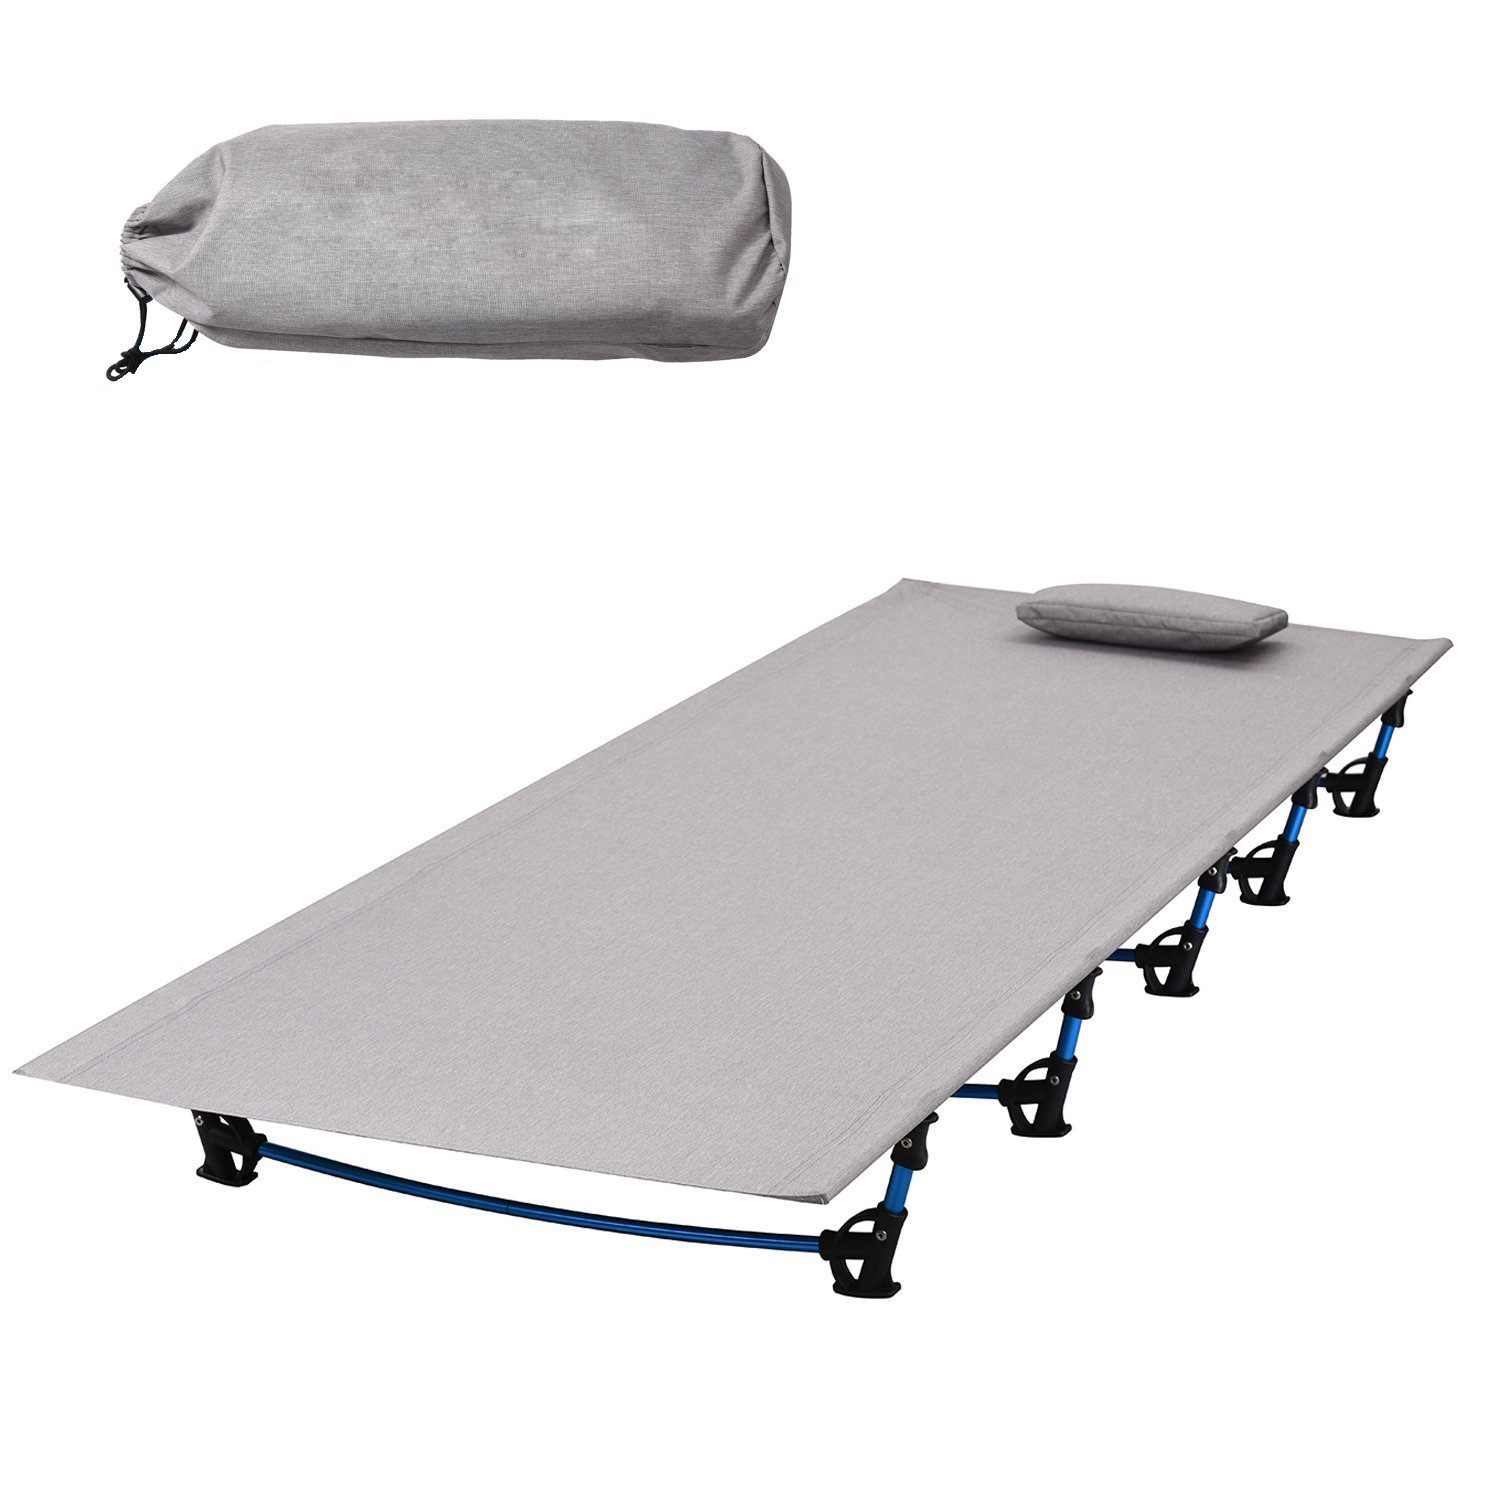 lightweight portable folding camping cot outdoor single bed with pillow